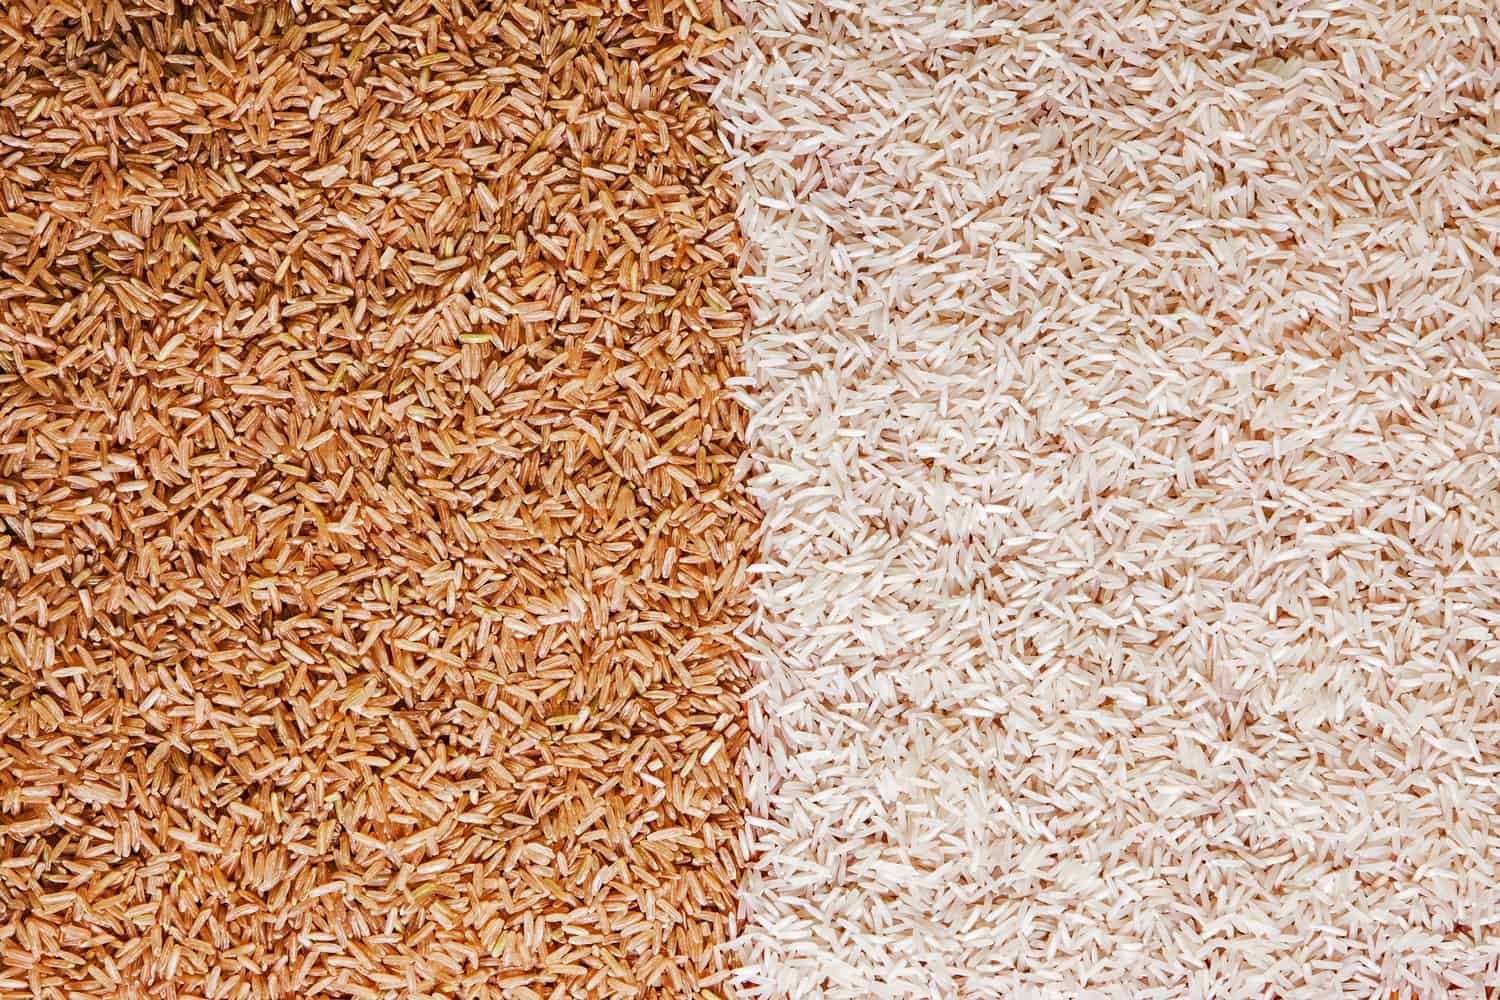 White and brown rice grains - contrast background texture.